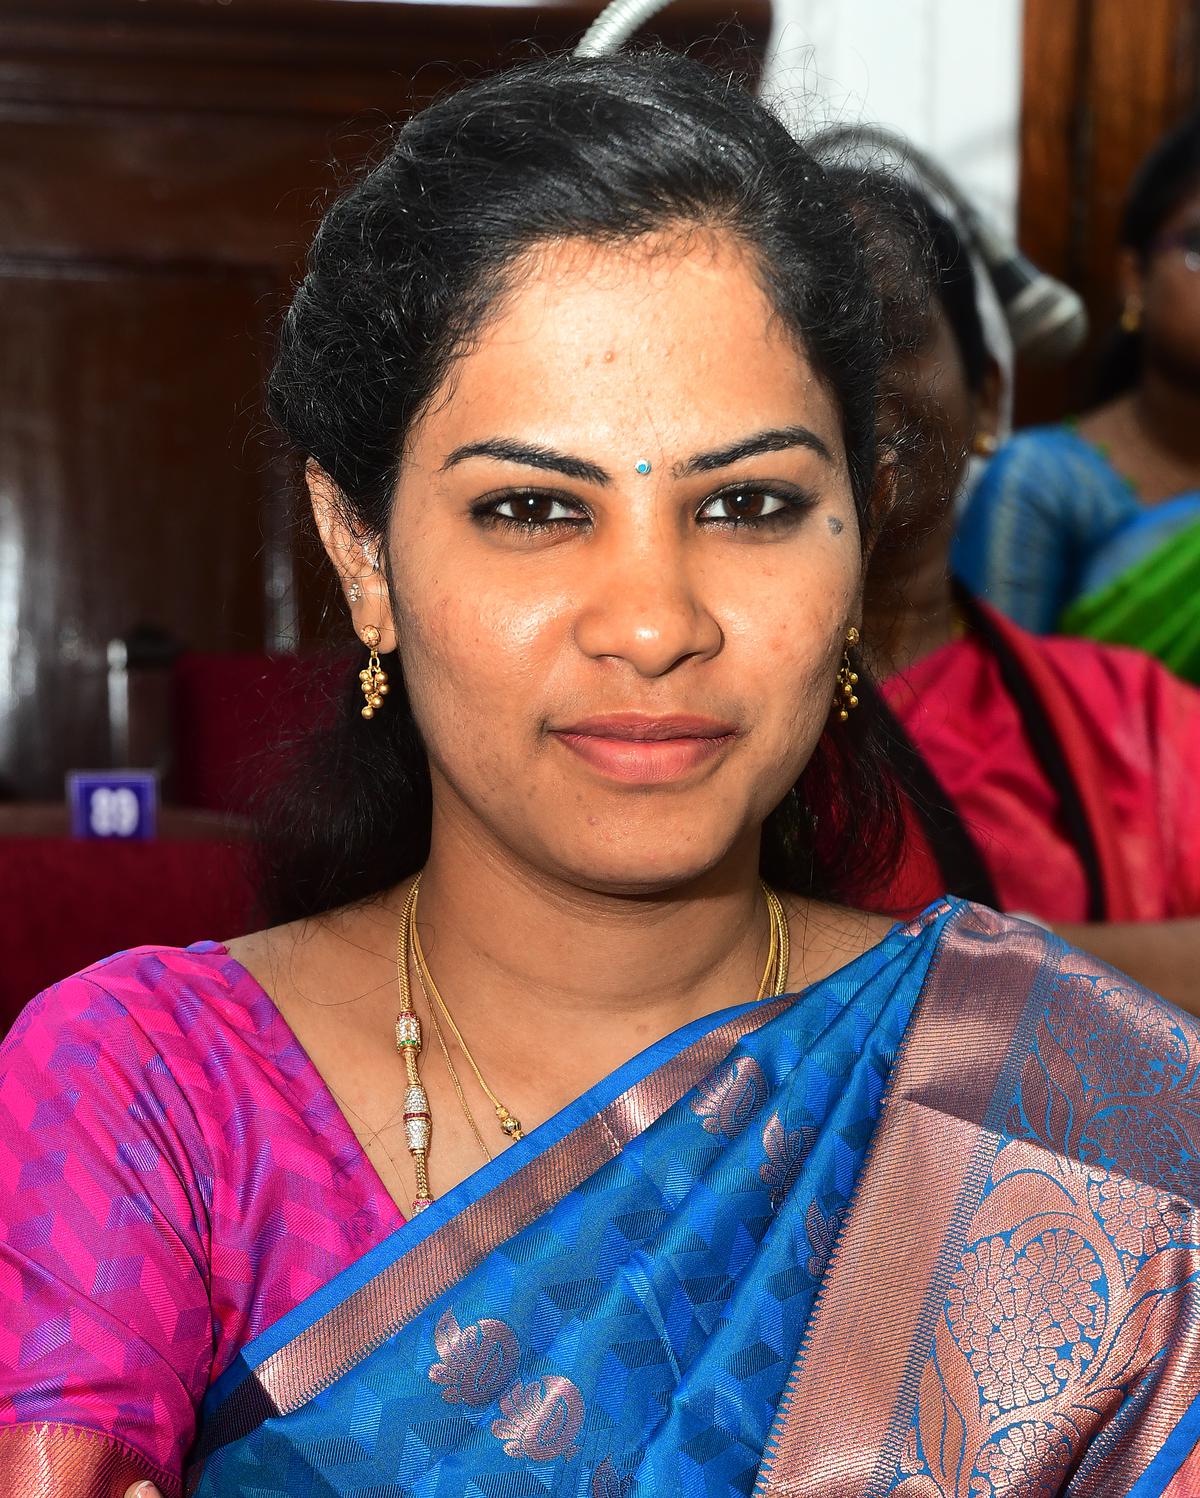 28-year-old woman set to become new Chennai Mayor - The Hindu